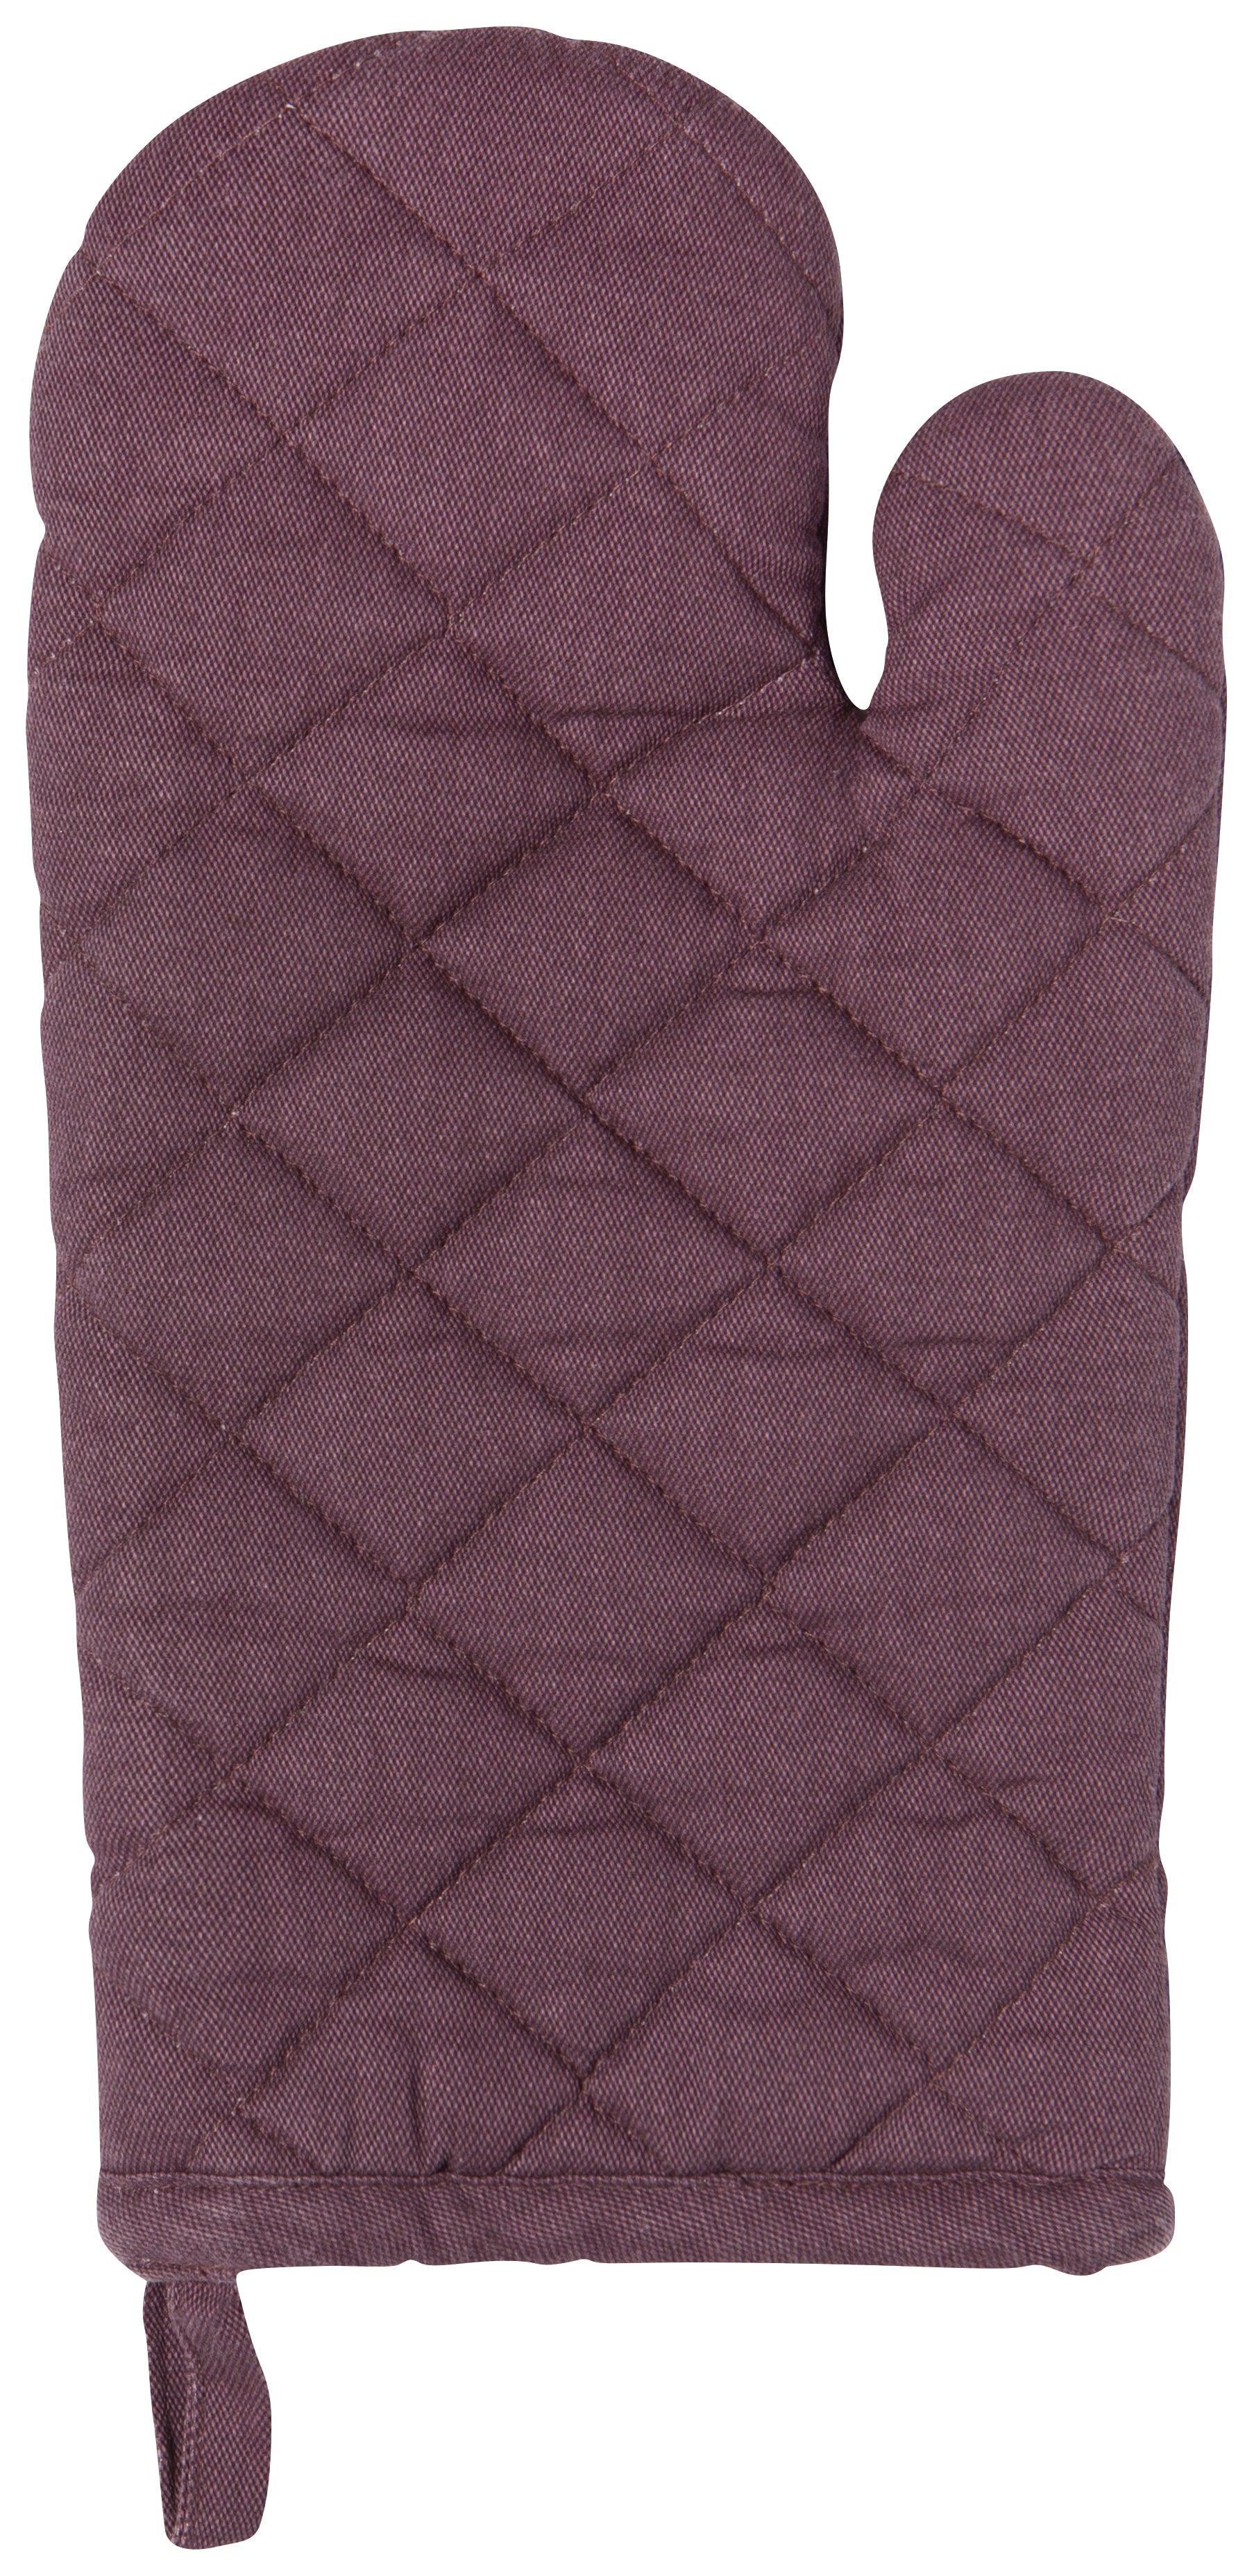 plum colored oven mitt on a white background